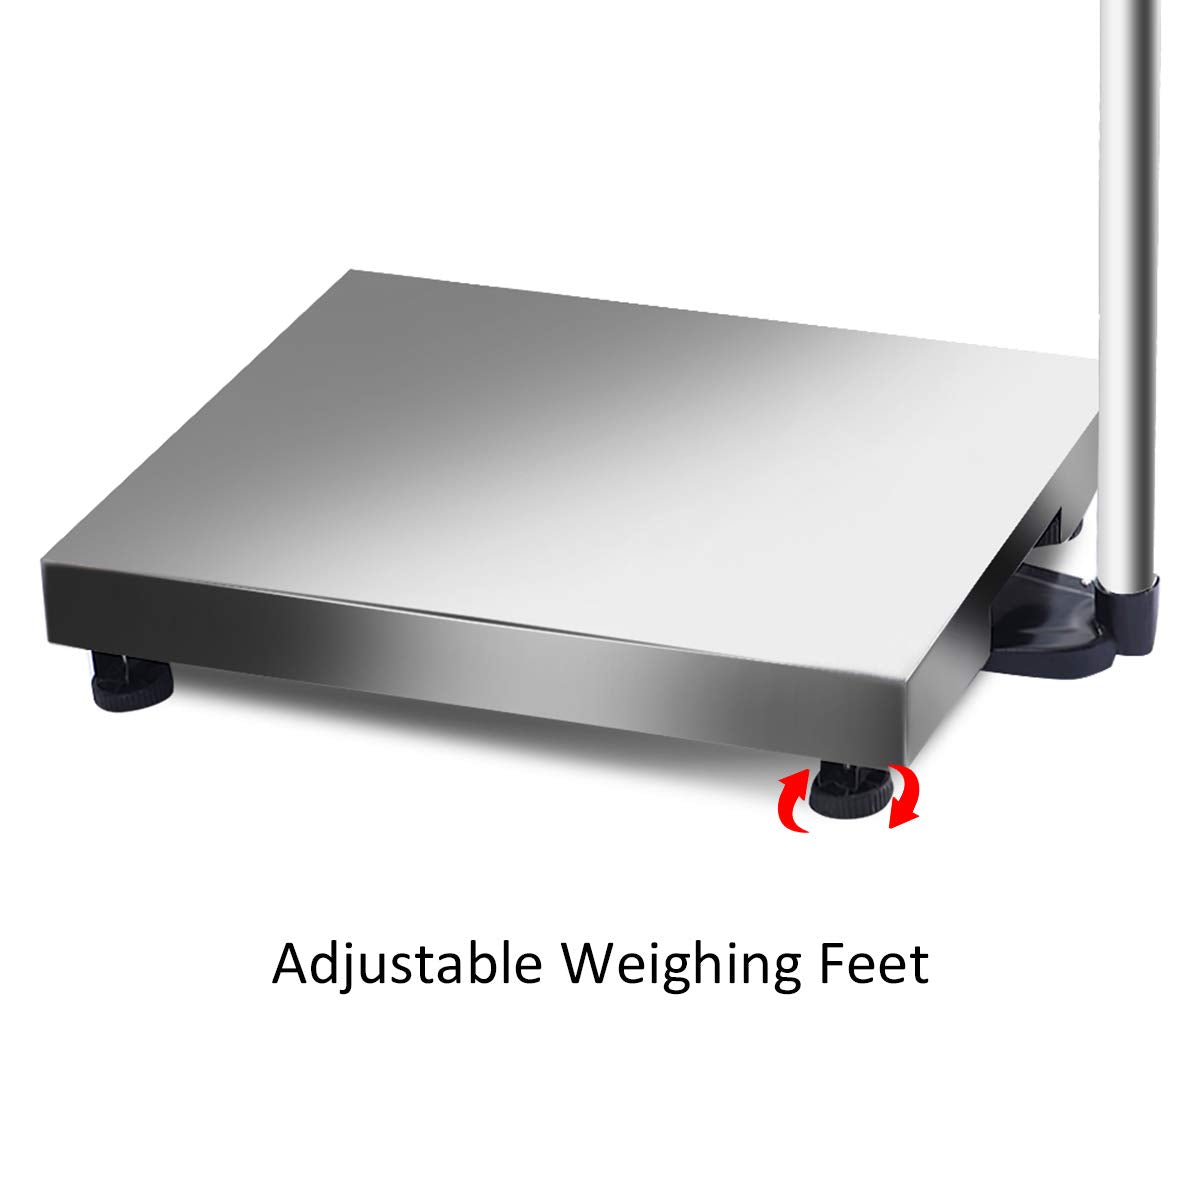 Giantex 660lbs Weight Computing Digital Scale Floor Platform Scale Postal Scale Accurate Shipping Mailing LB/KG Price Calculator, Silver - Giantexus